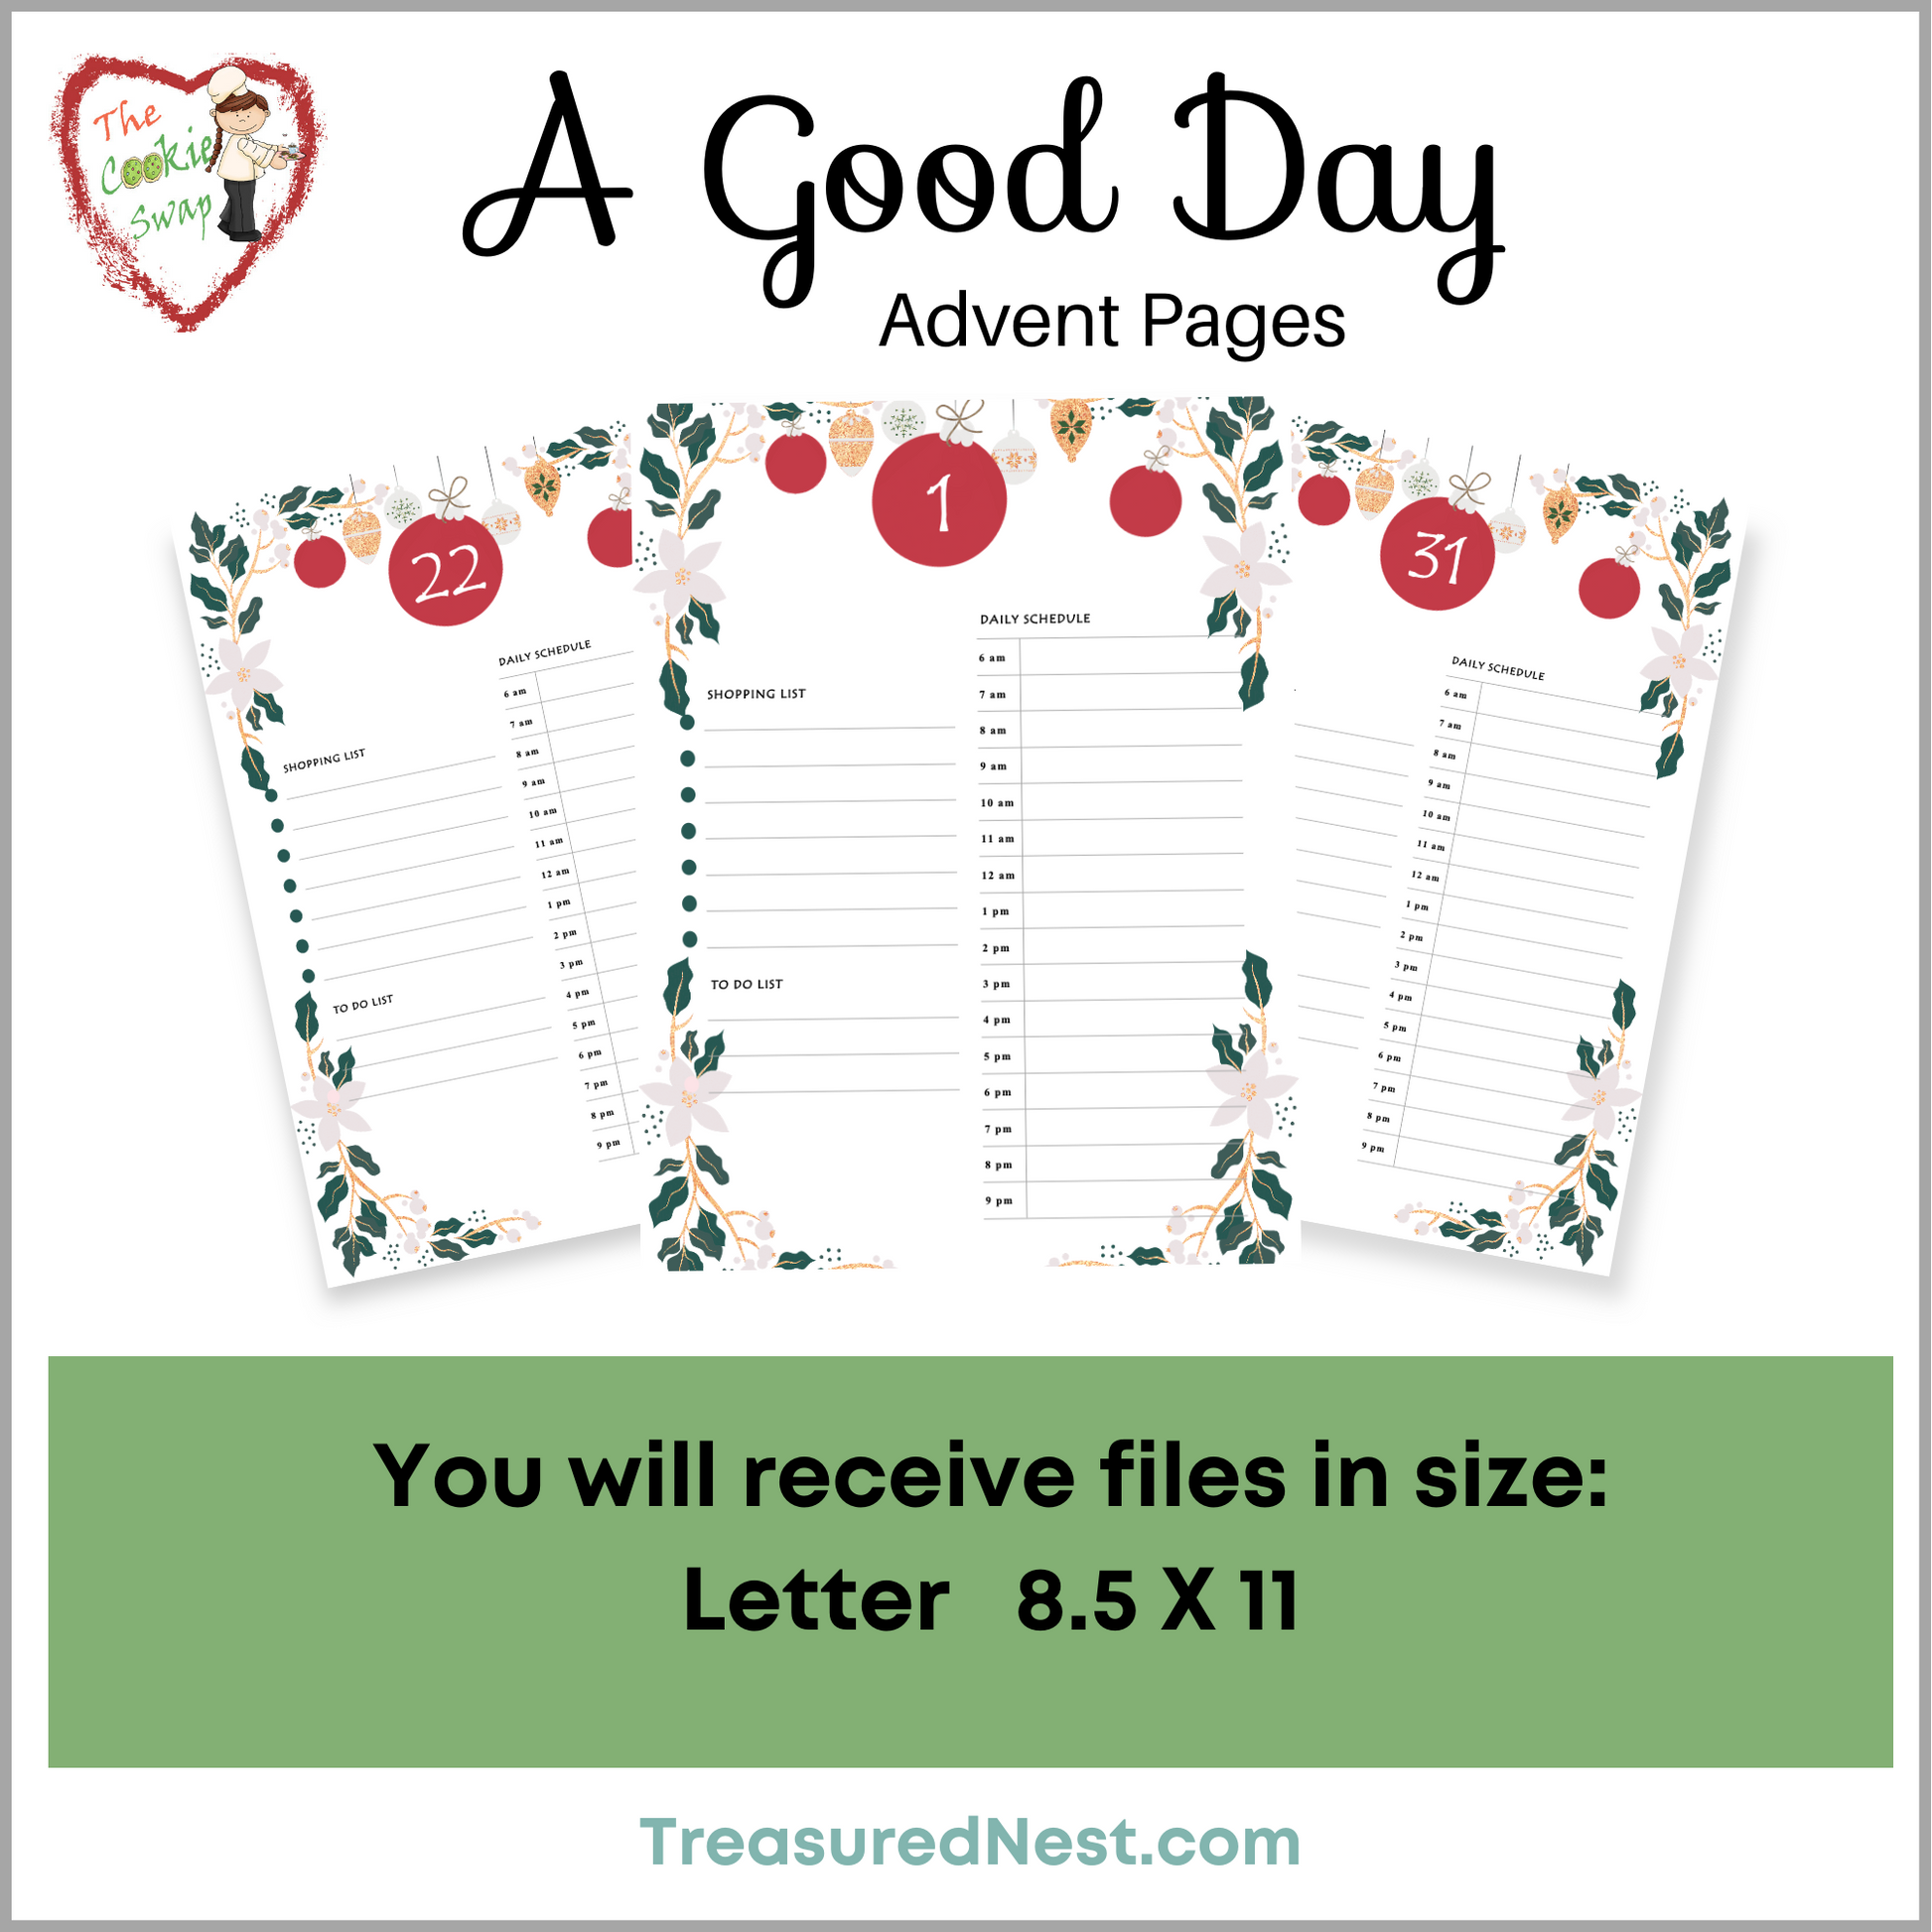 Advent Pages